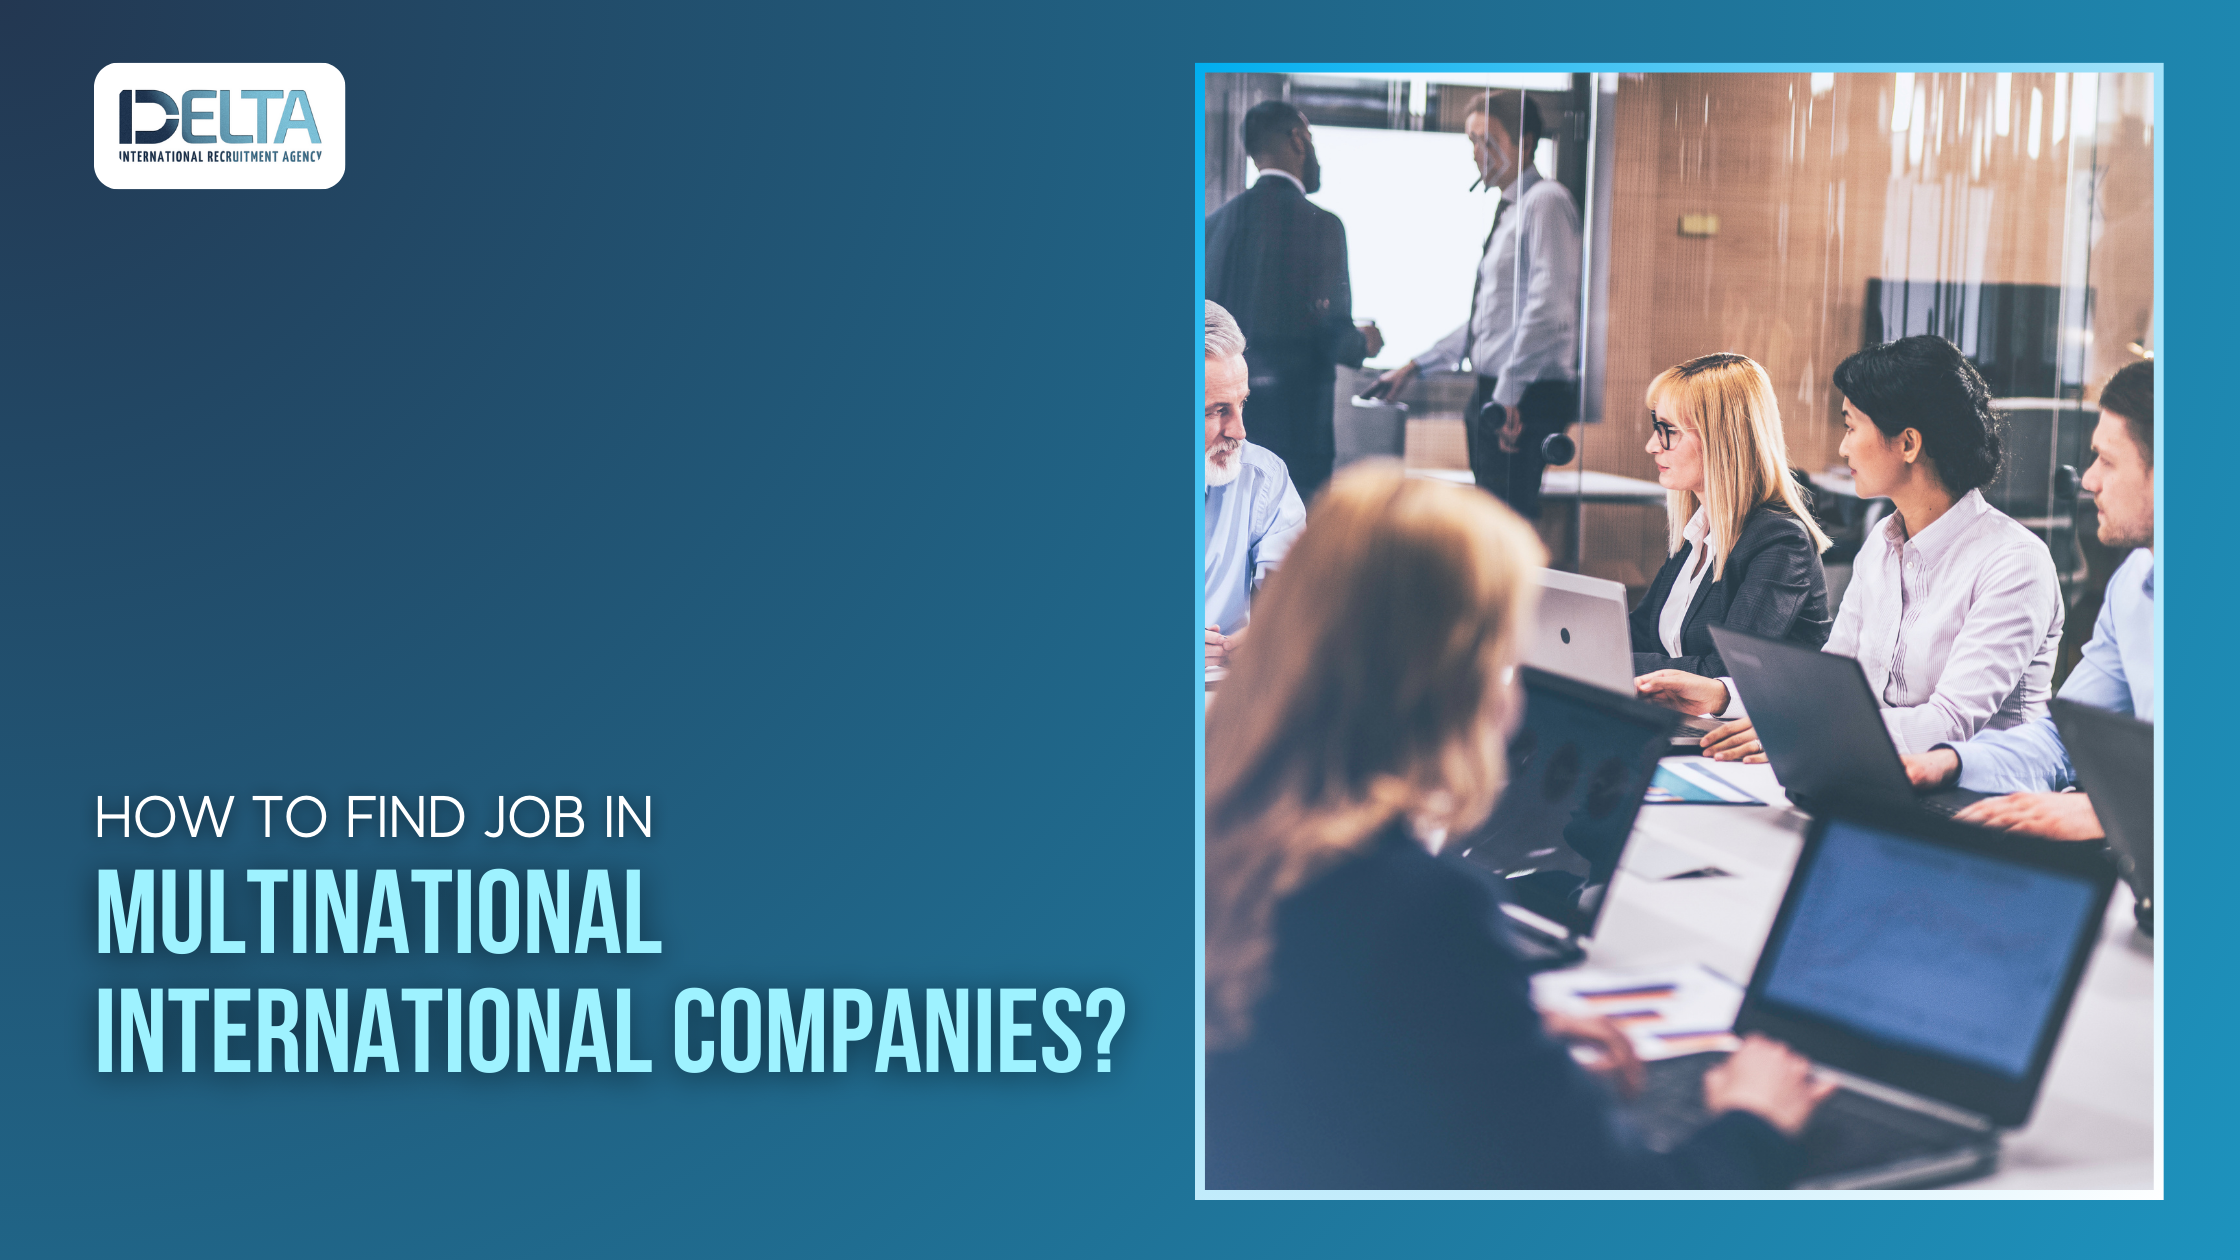 How to Find Job in Multinational International Companies?